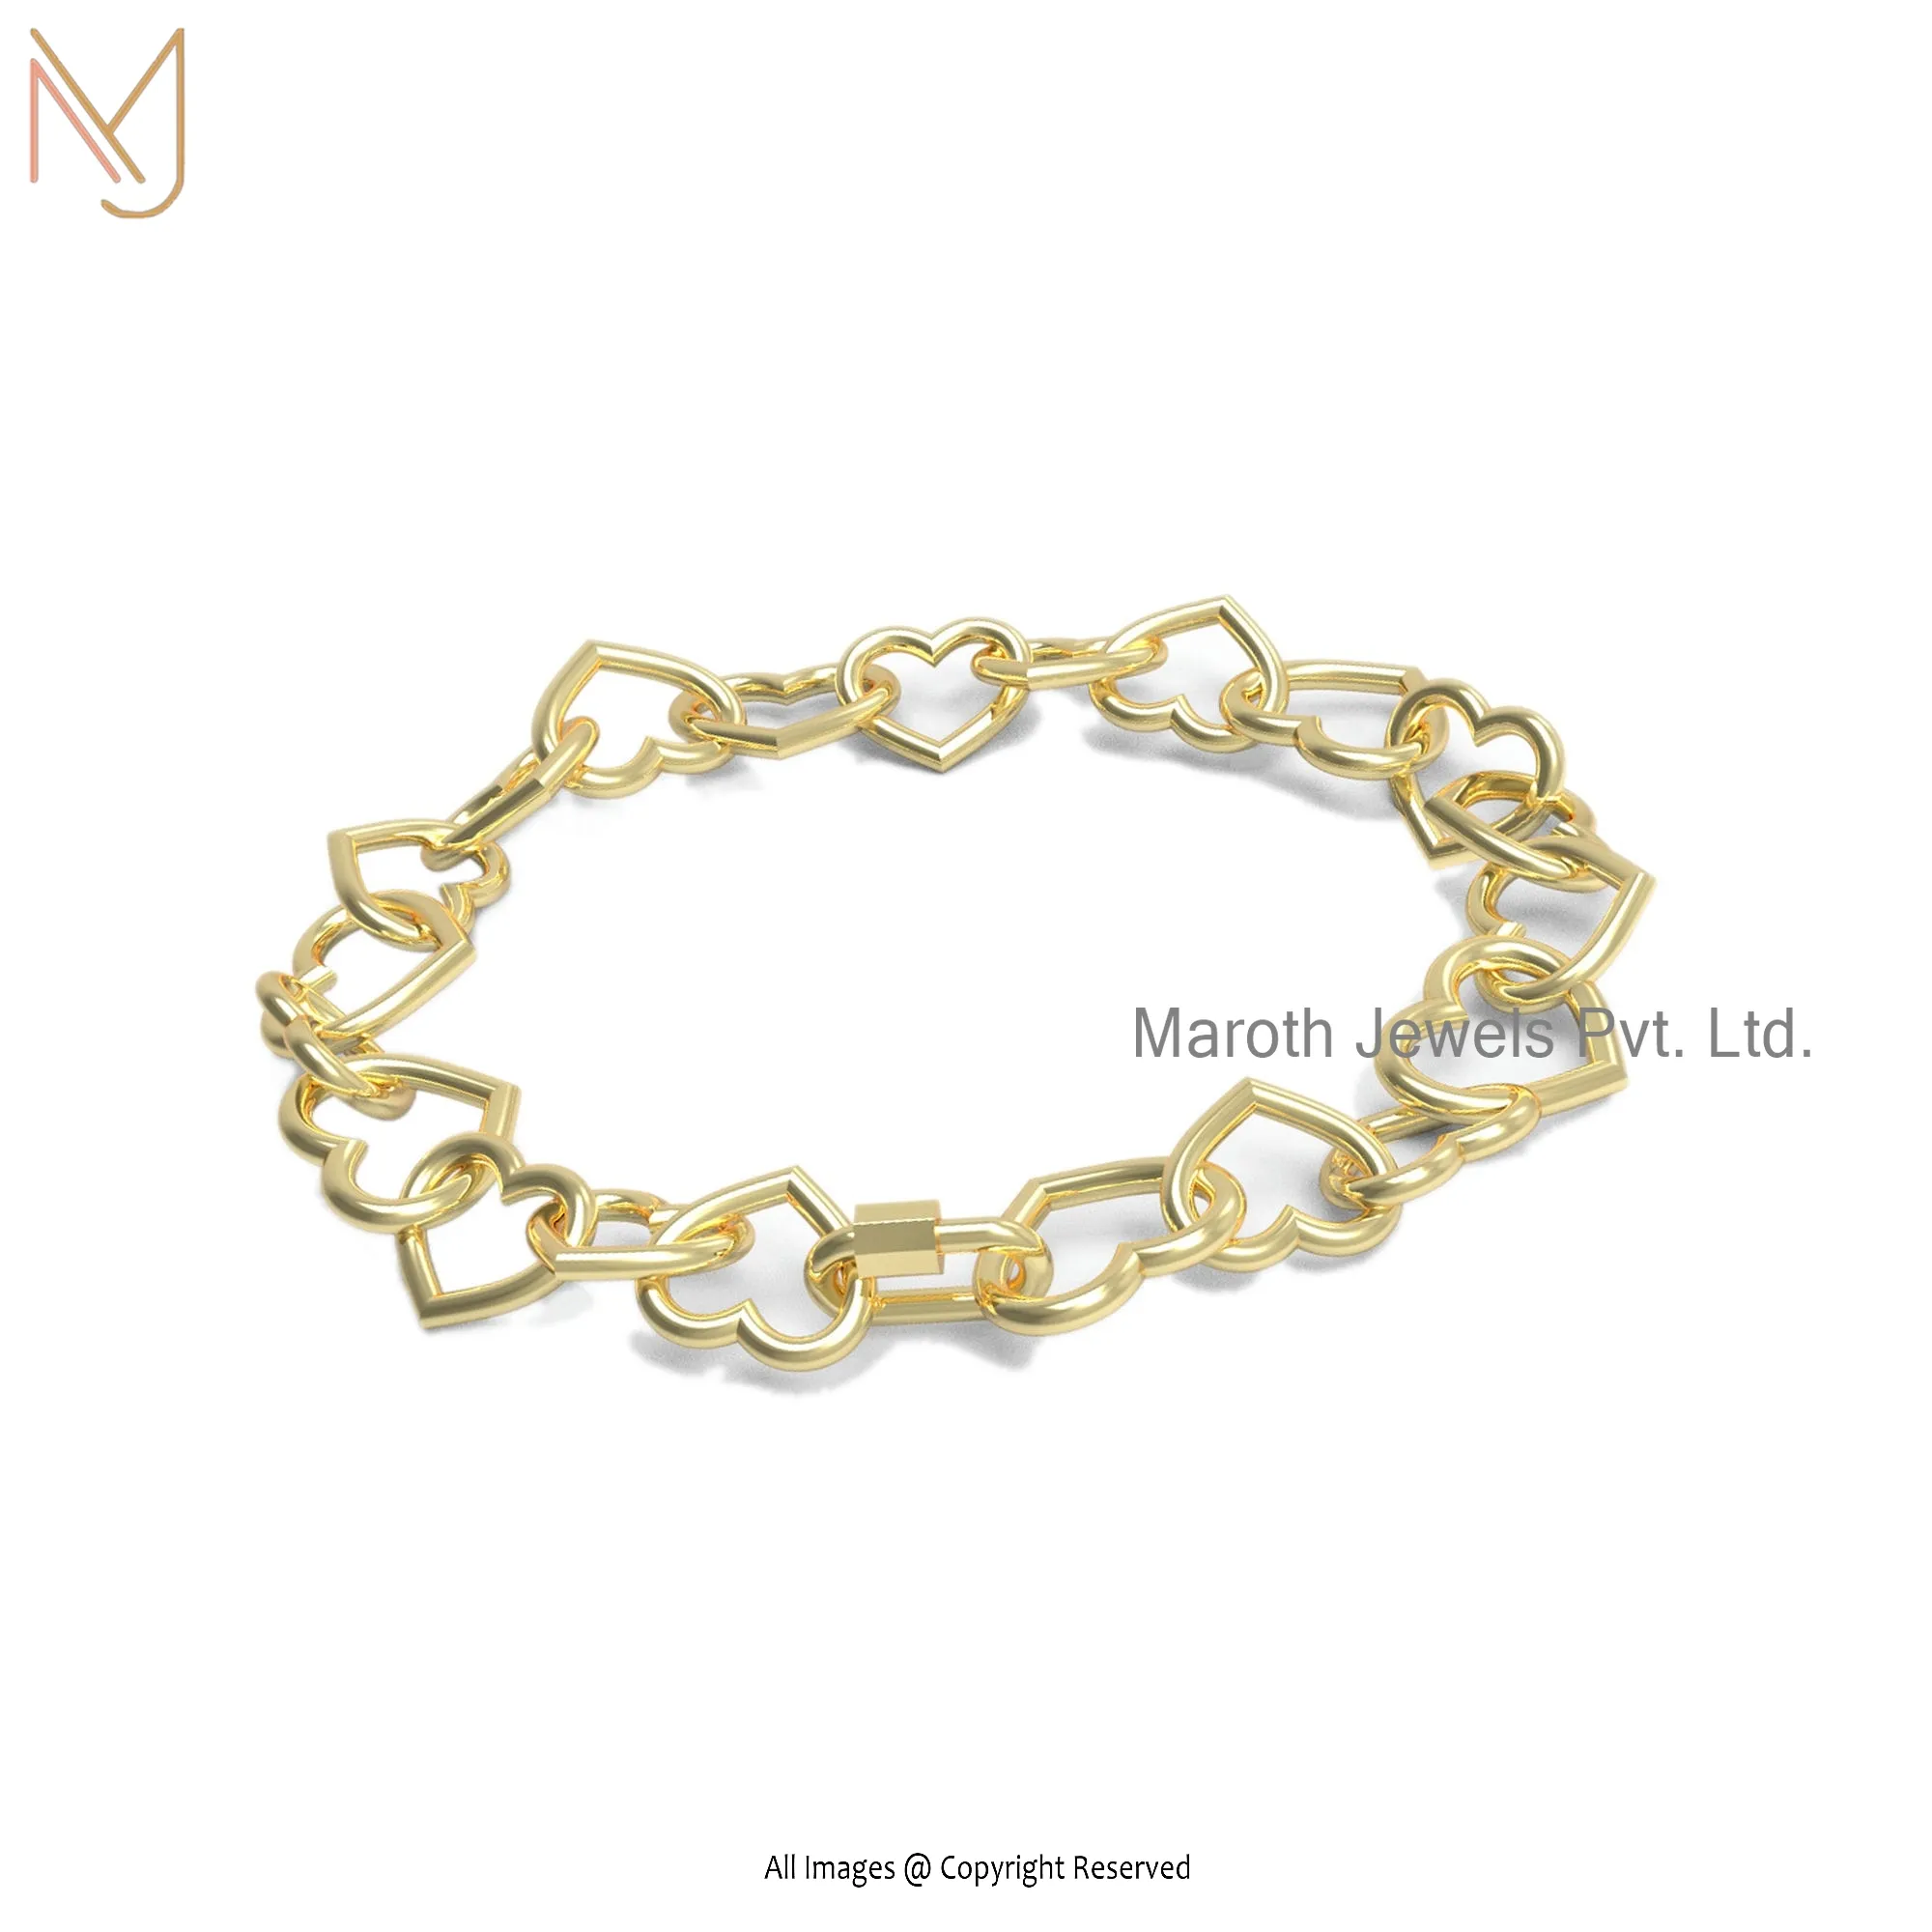 Private Label 14k Yellow Gold Heart And Carabiner Lock Bracelet